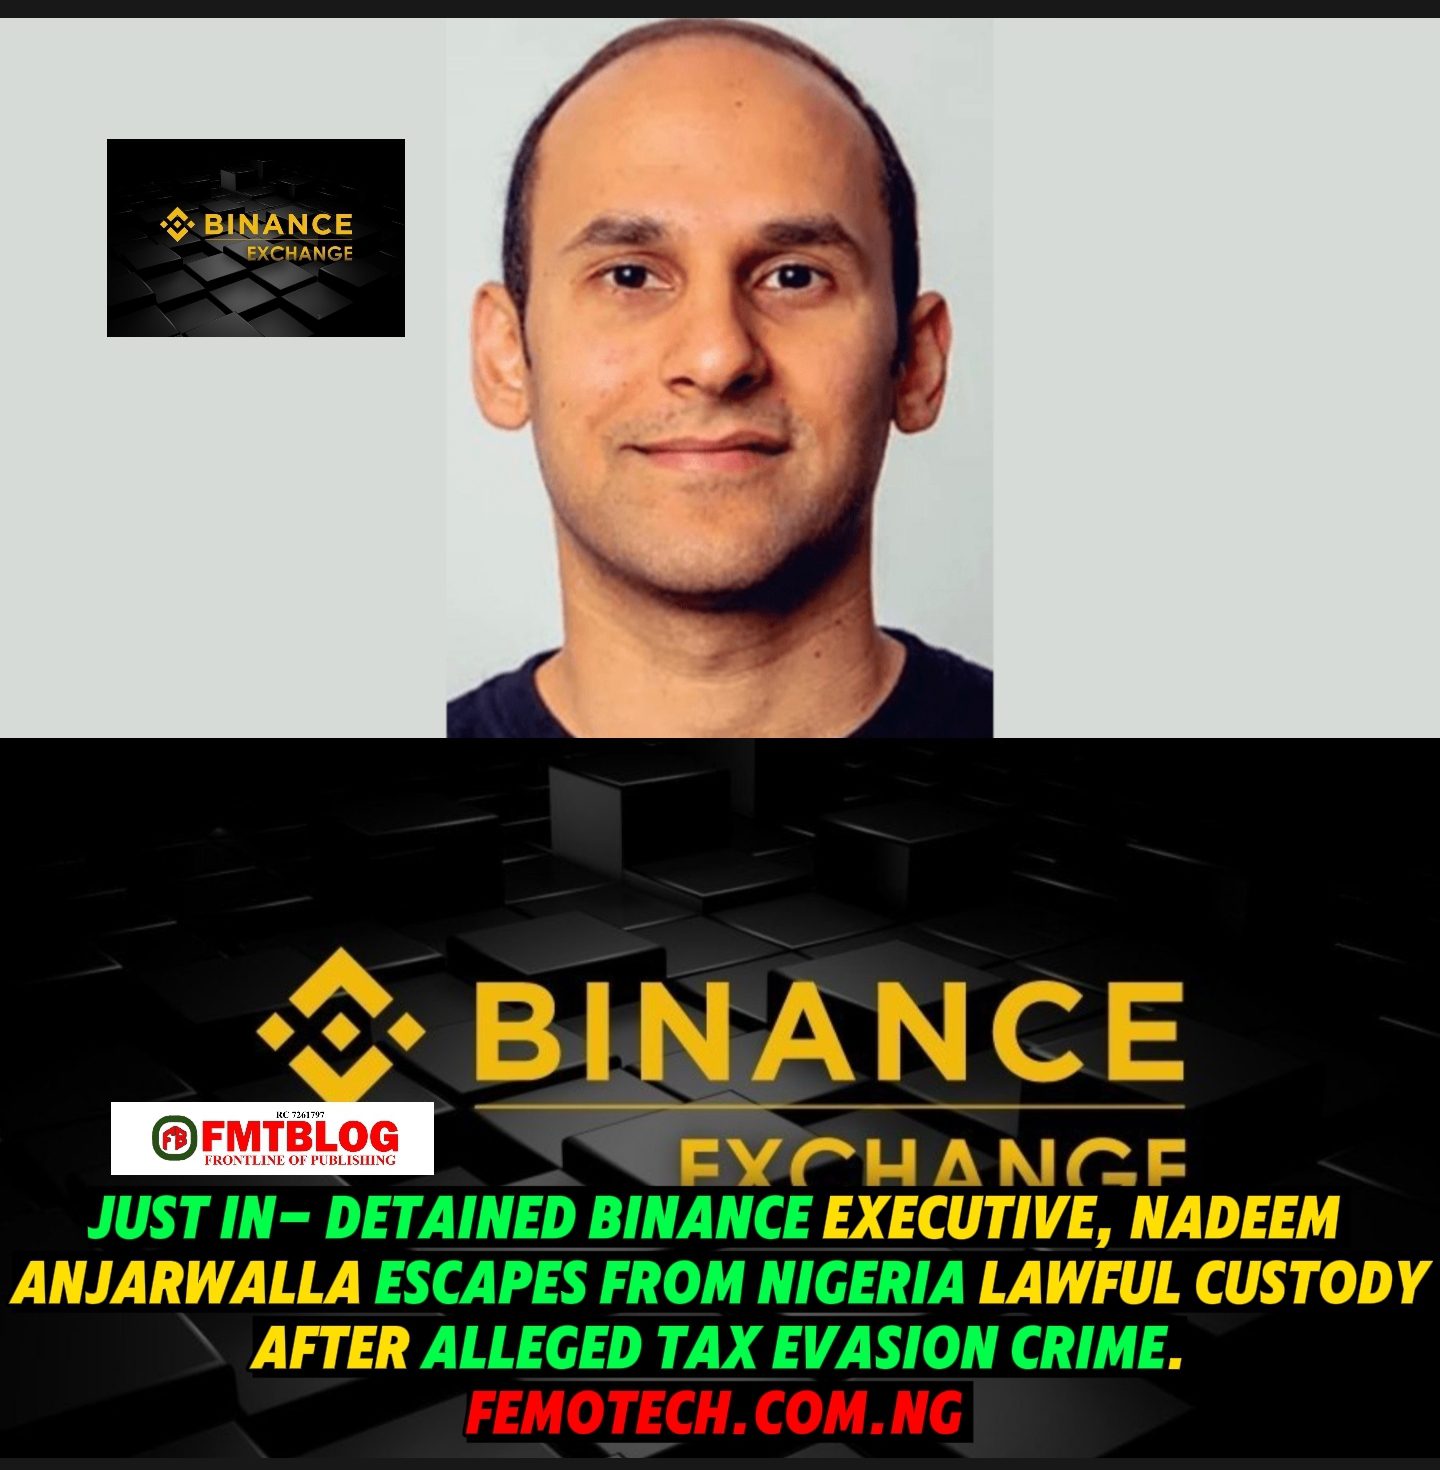 JUST IN – Detained Binance Executive, Nadeem Escapes From Nigeria Lawful Custody After Alleged Tax Evasion